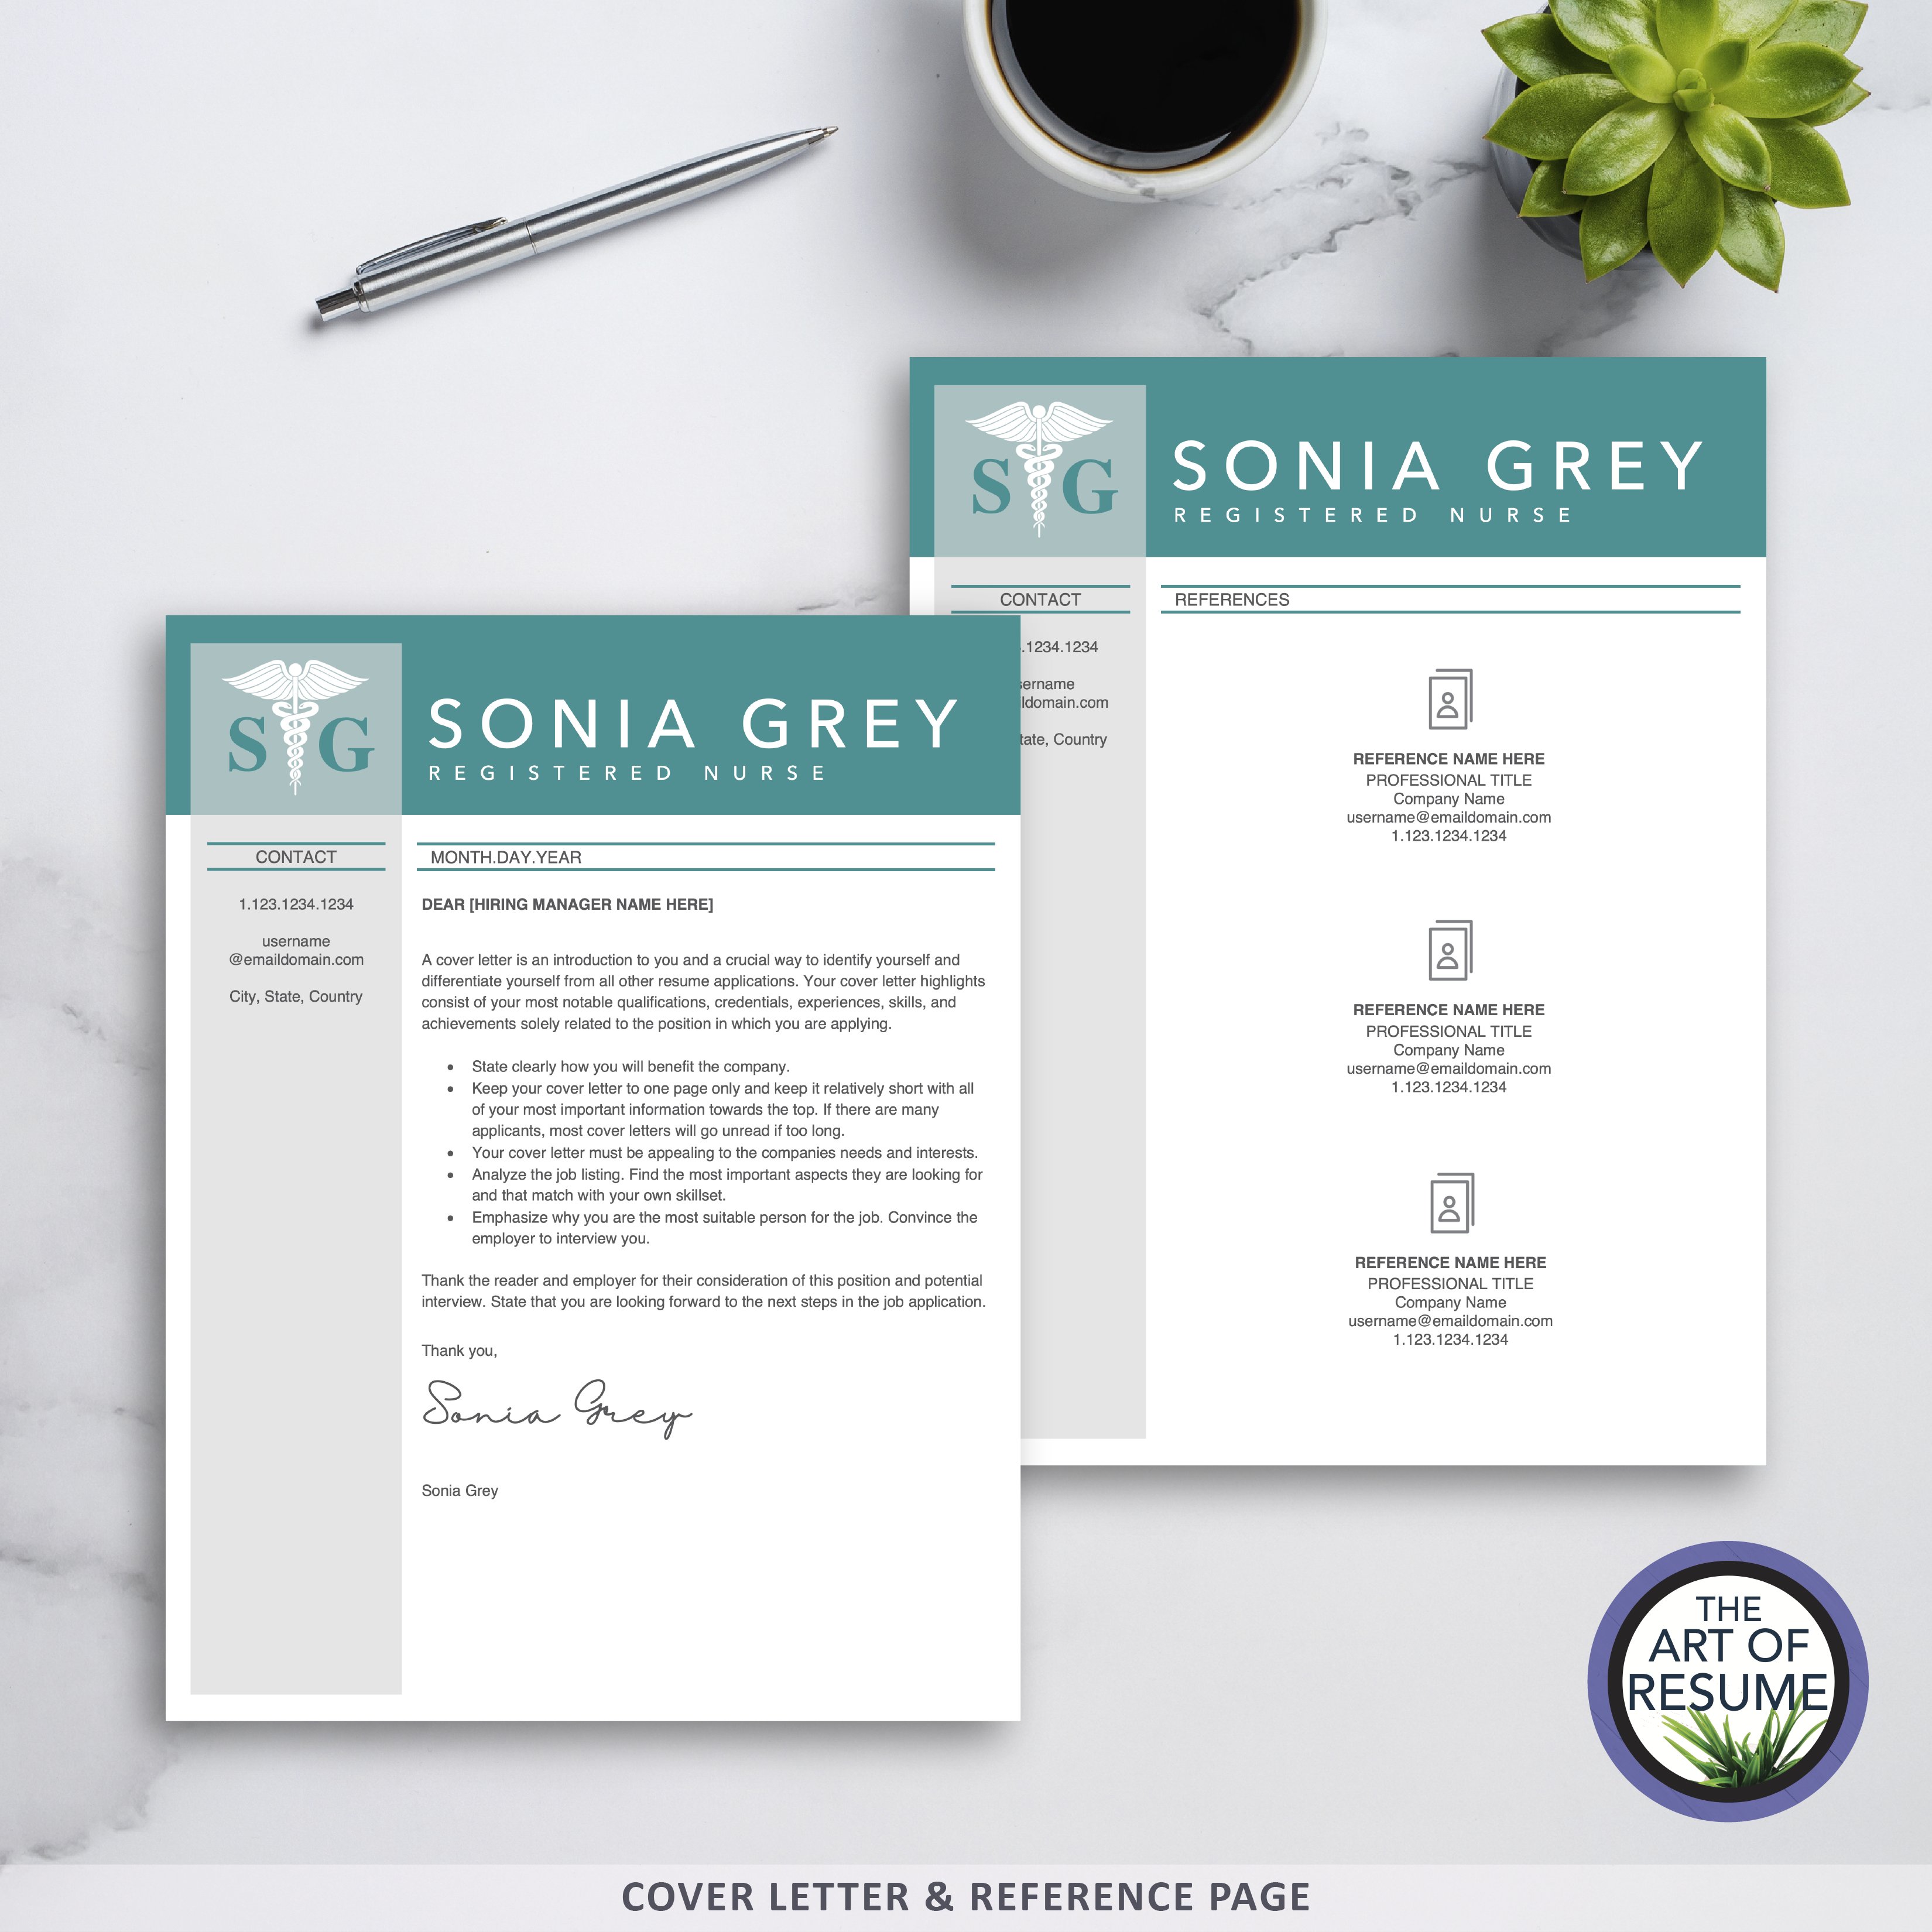 Two resume templates on a table with a cup of coffee.